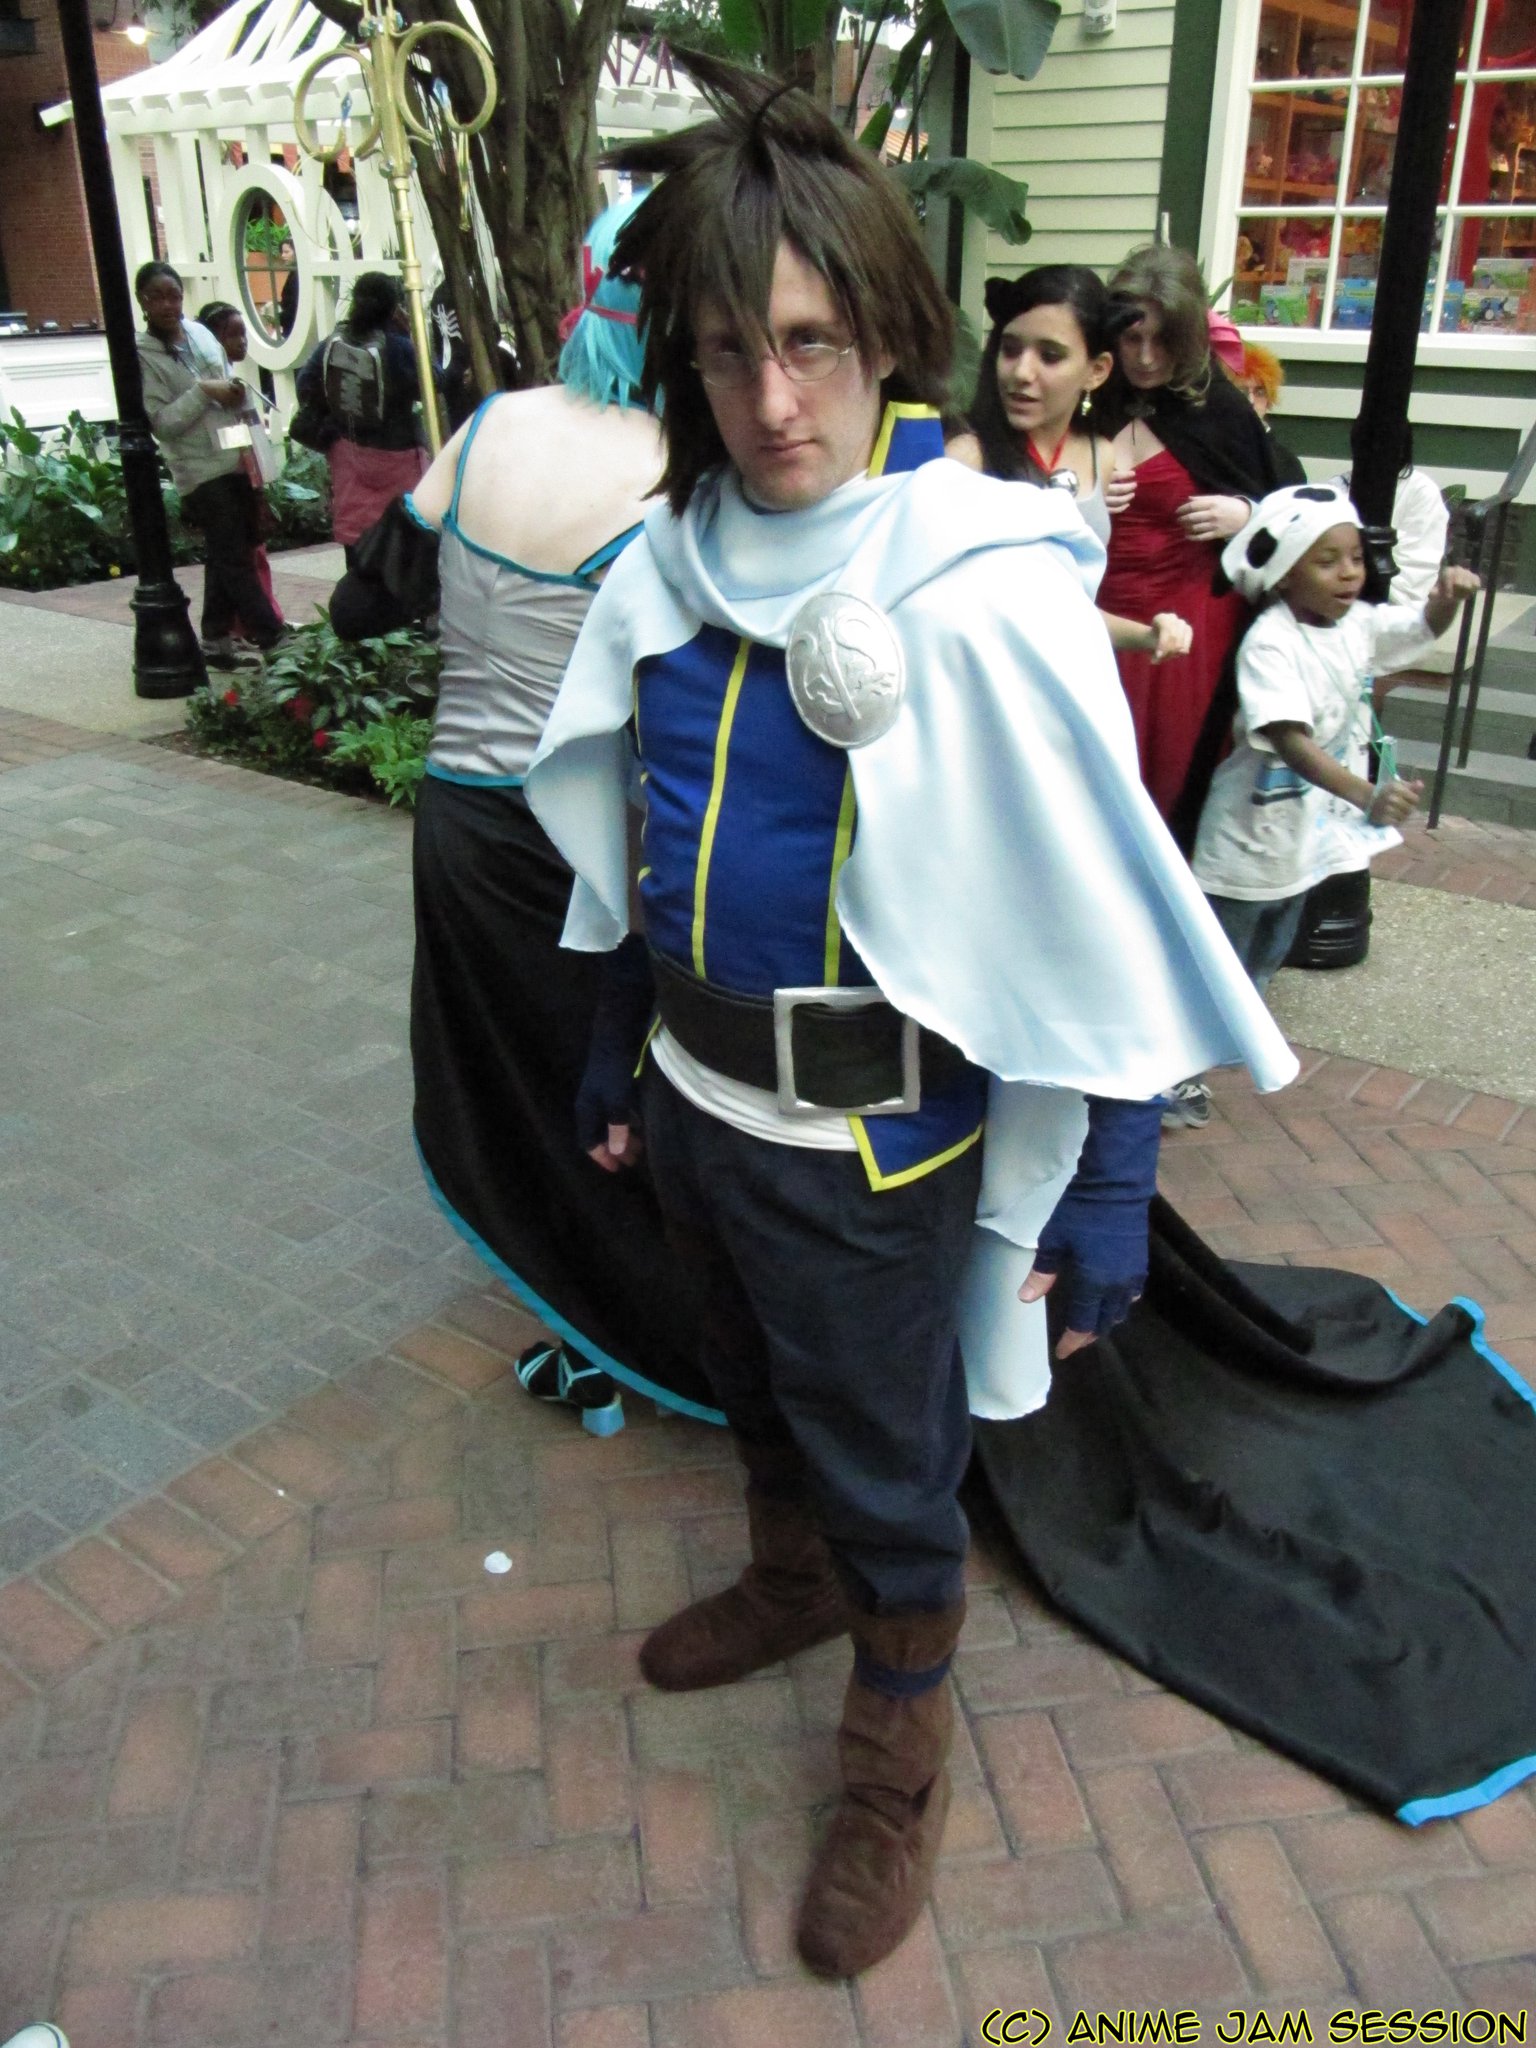 The Legend of the Legendary Heroes Cosplay Ryner Lute Costume